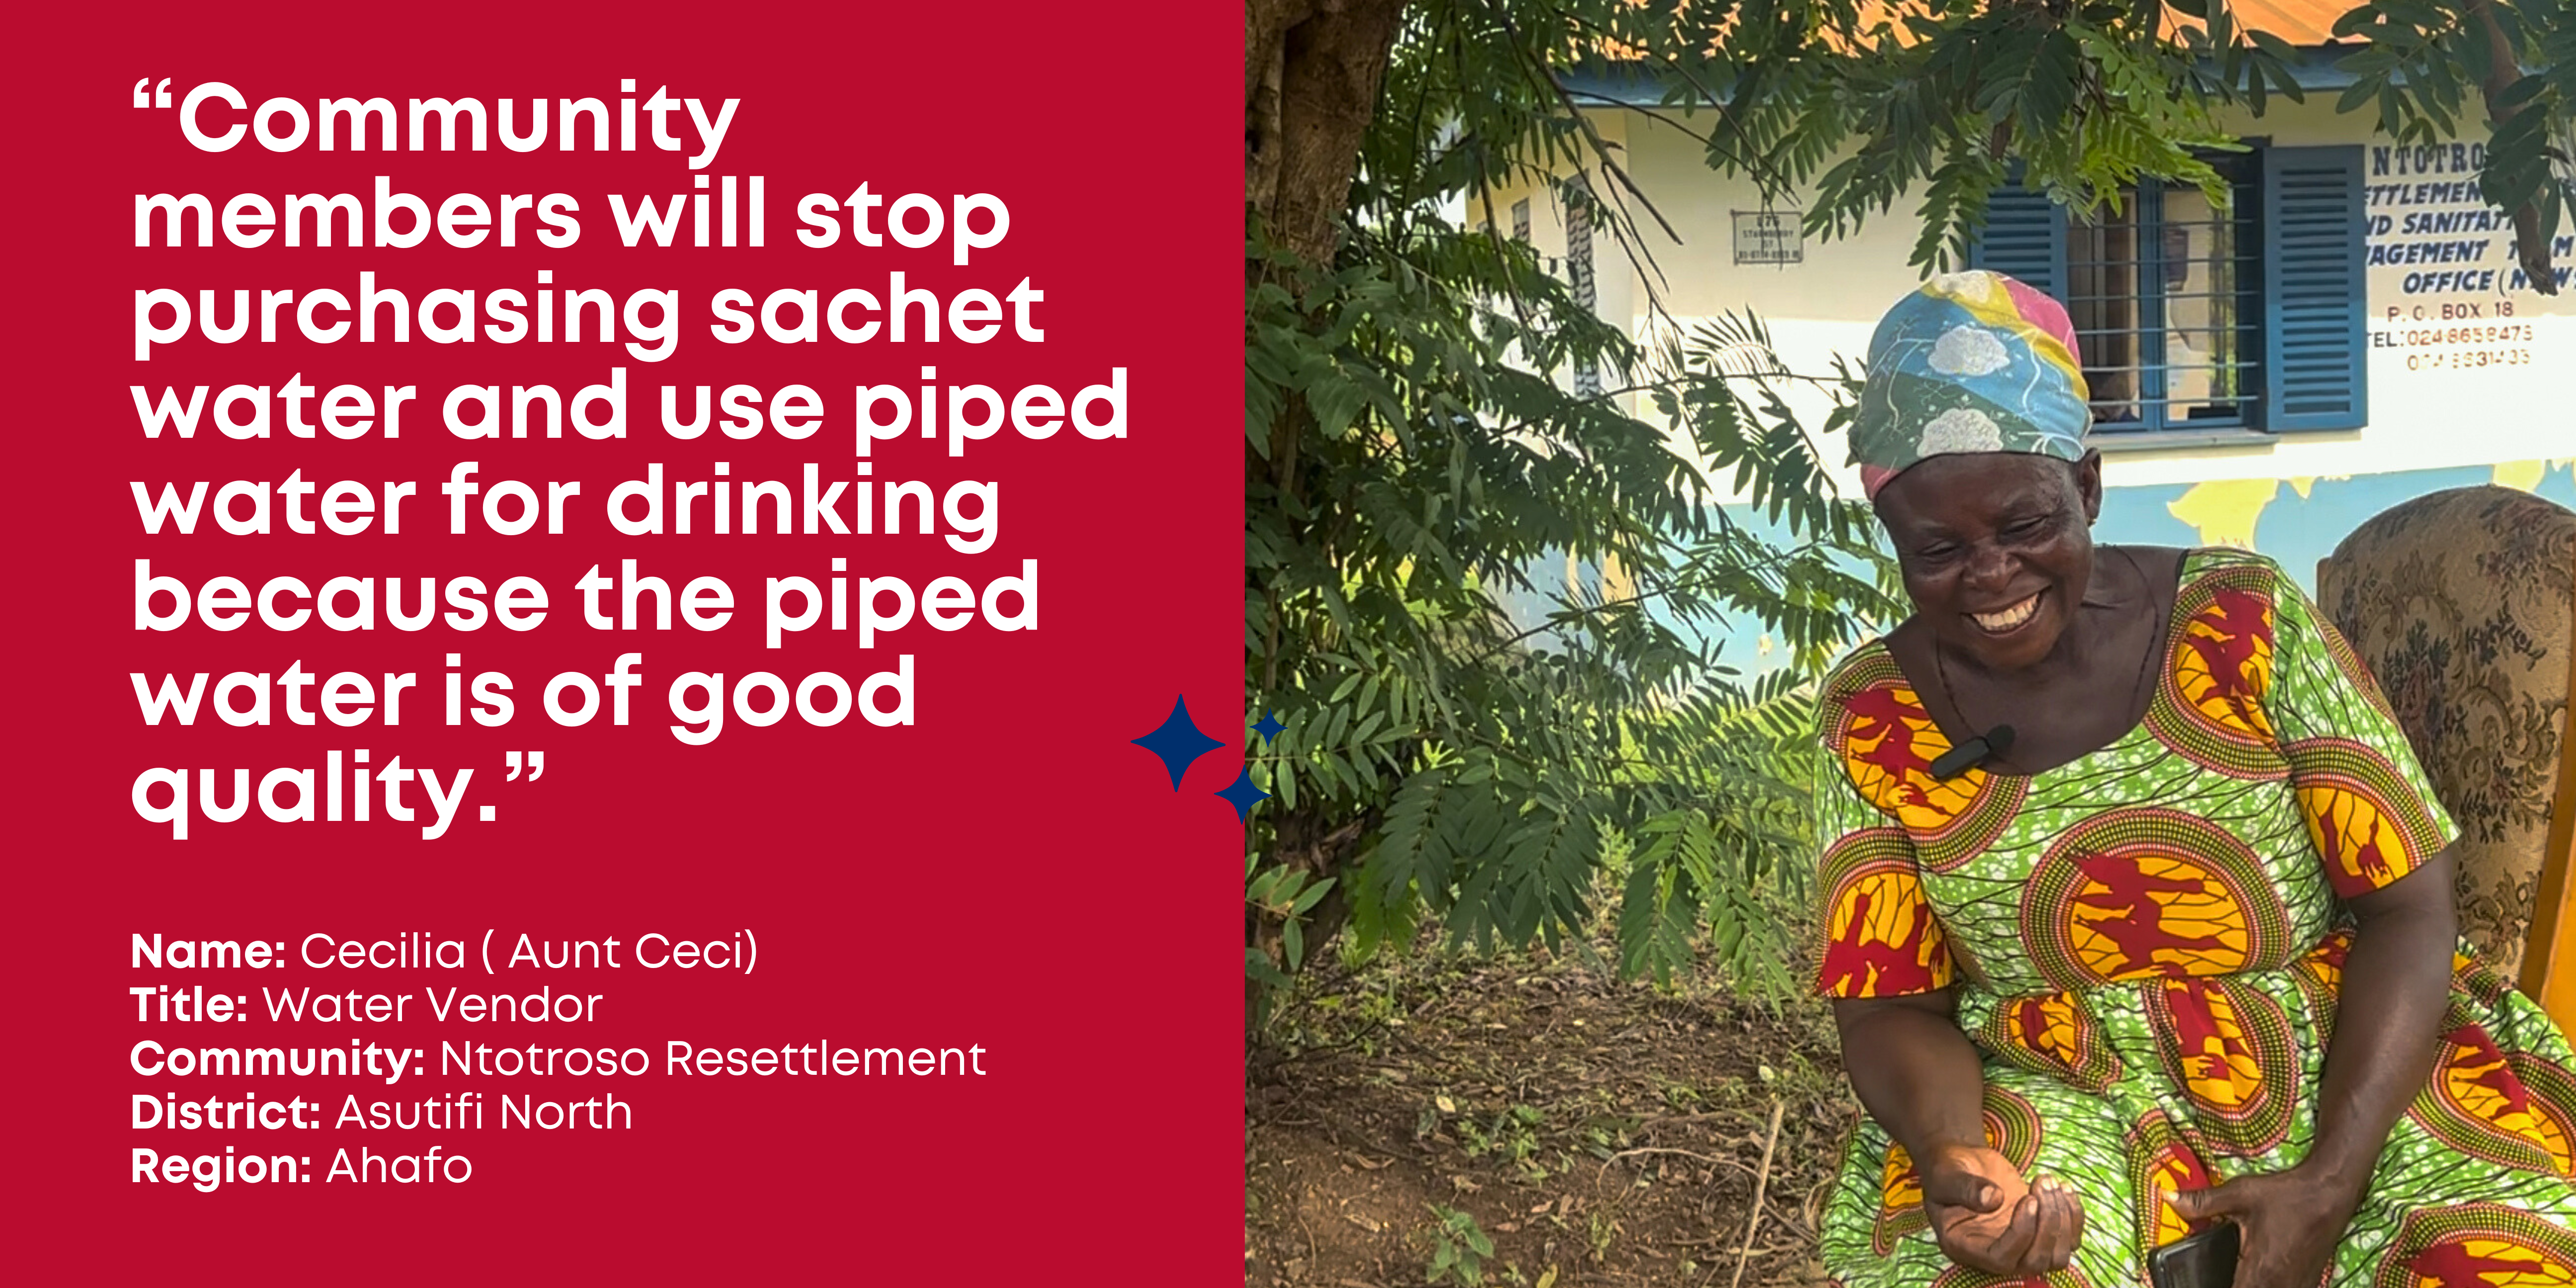 Cecilia, or Aunt Ceci, laughs sitting under a tree and wearing a colorful traditional dress and headcovering. "Community members will stop purchasing sachet water and use piped water for drinking because the piped water is of good quality." Asutifi North, Ahafo, Ghana